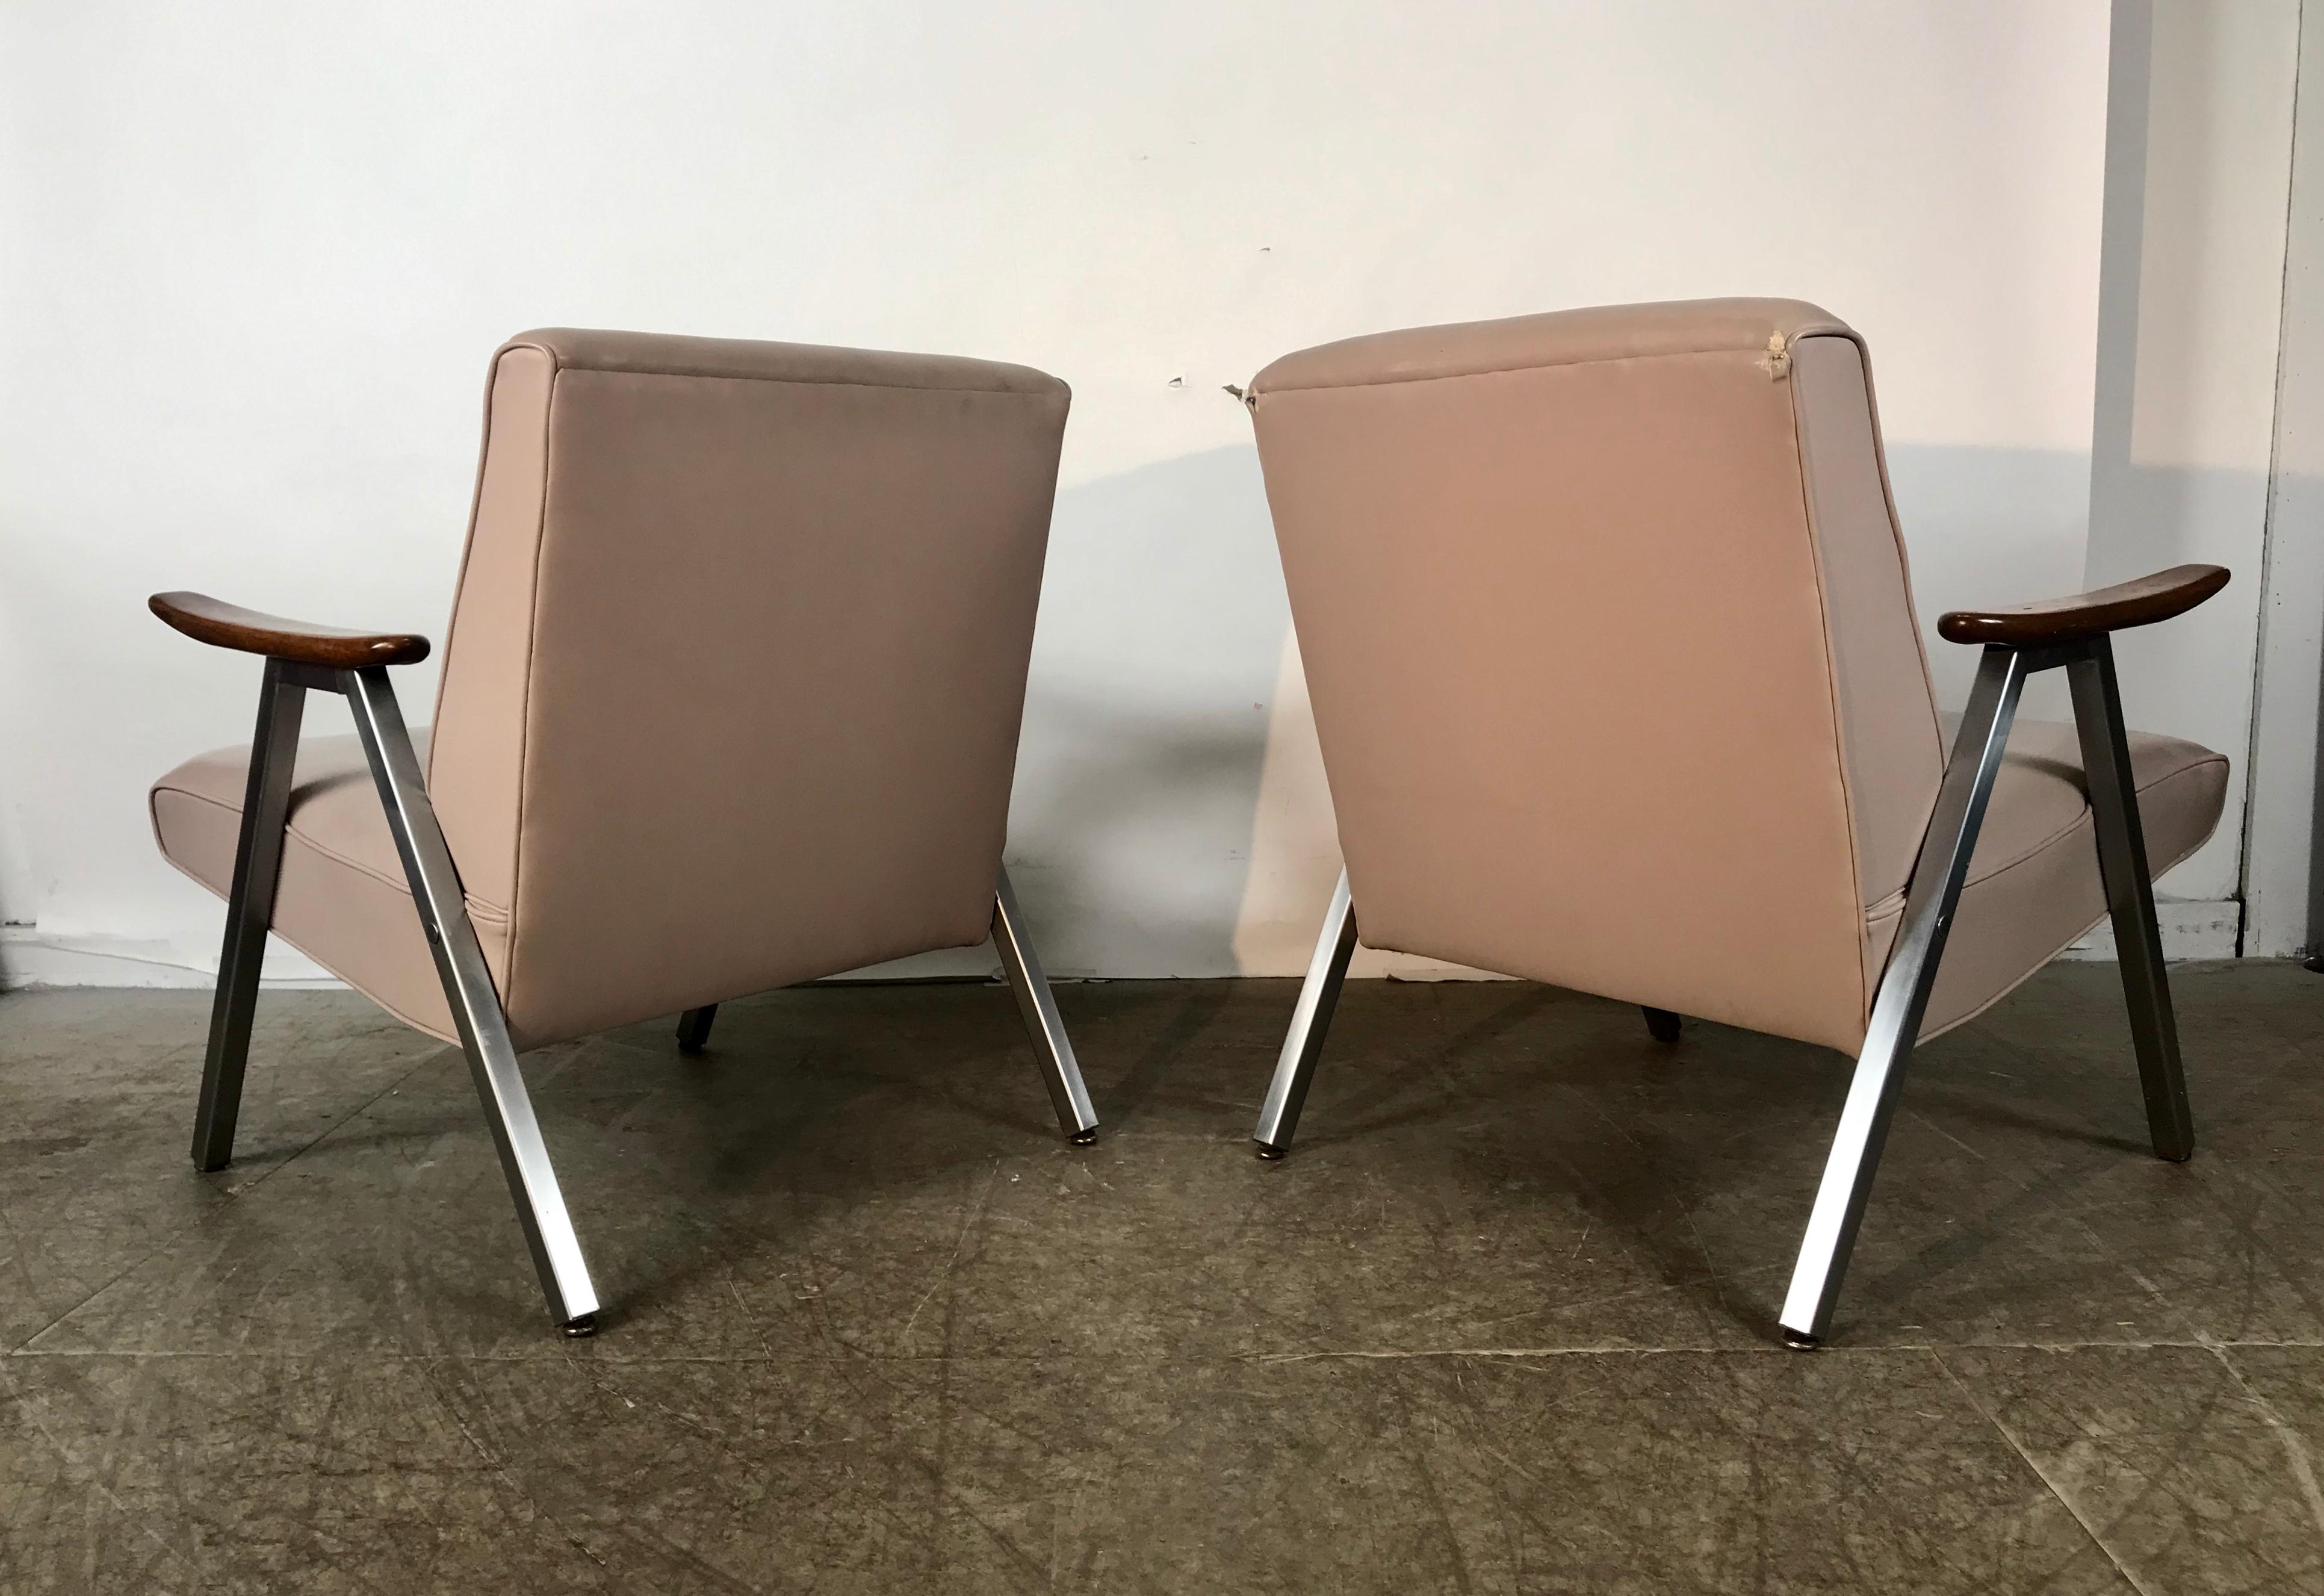 Classic Pair of Royal Chrome Aluminum Lounge Chairs In Good Condition For Sale In Buffalo, NY